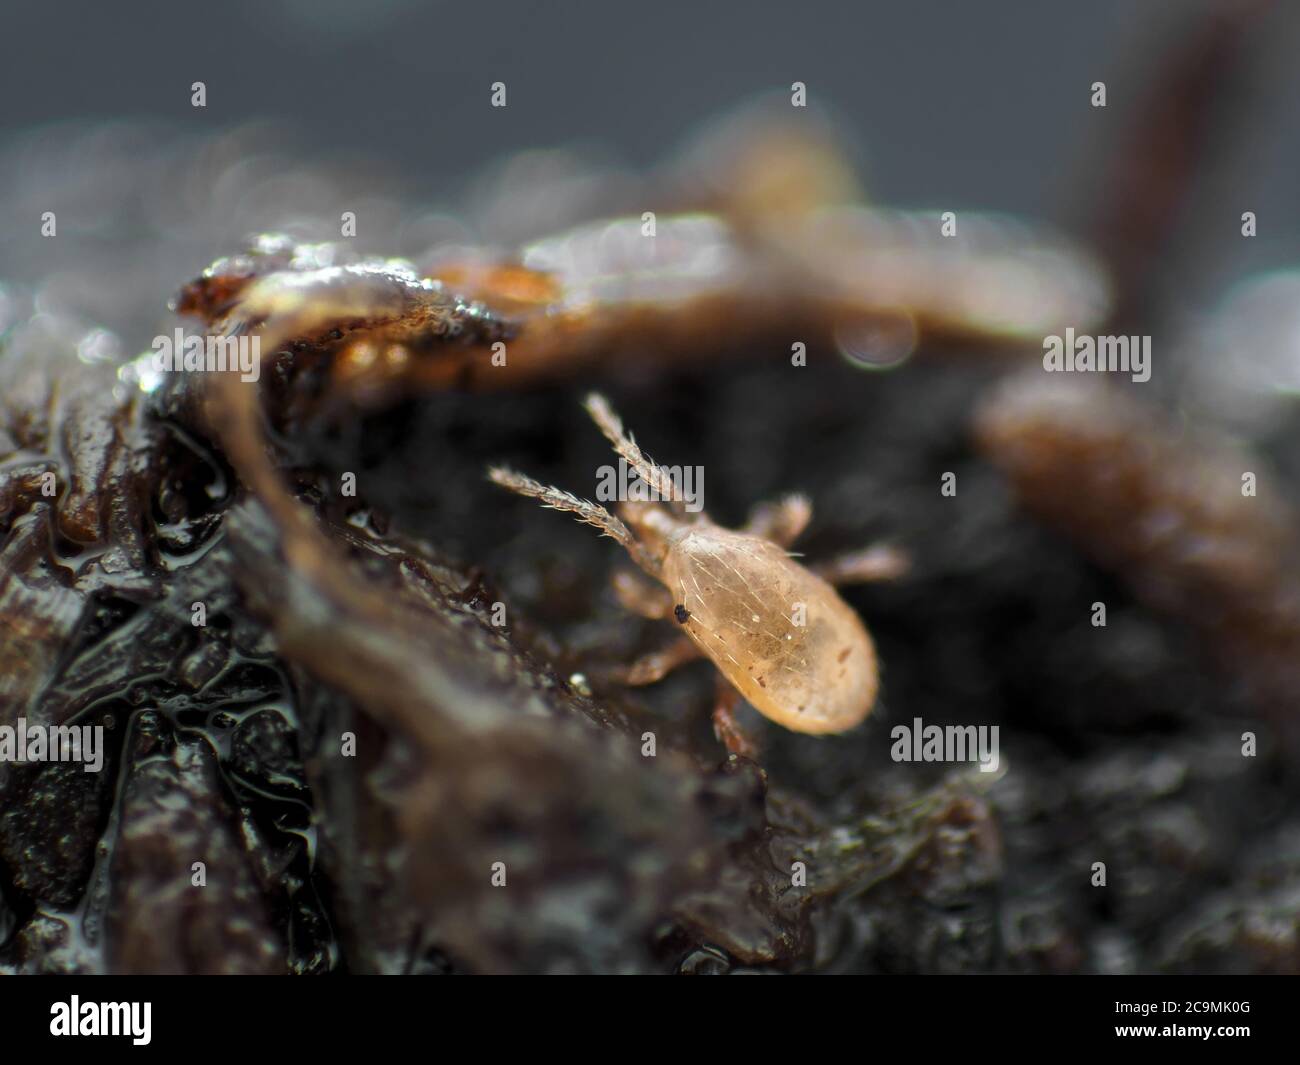 Tiny soil mite (live and active) under the microscope Stock Photo